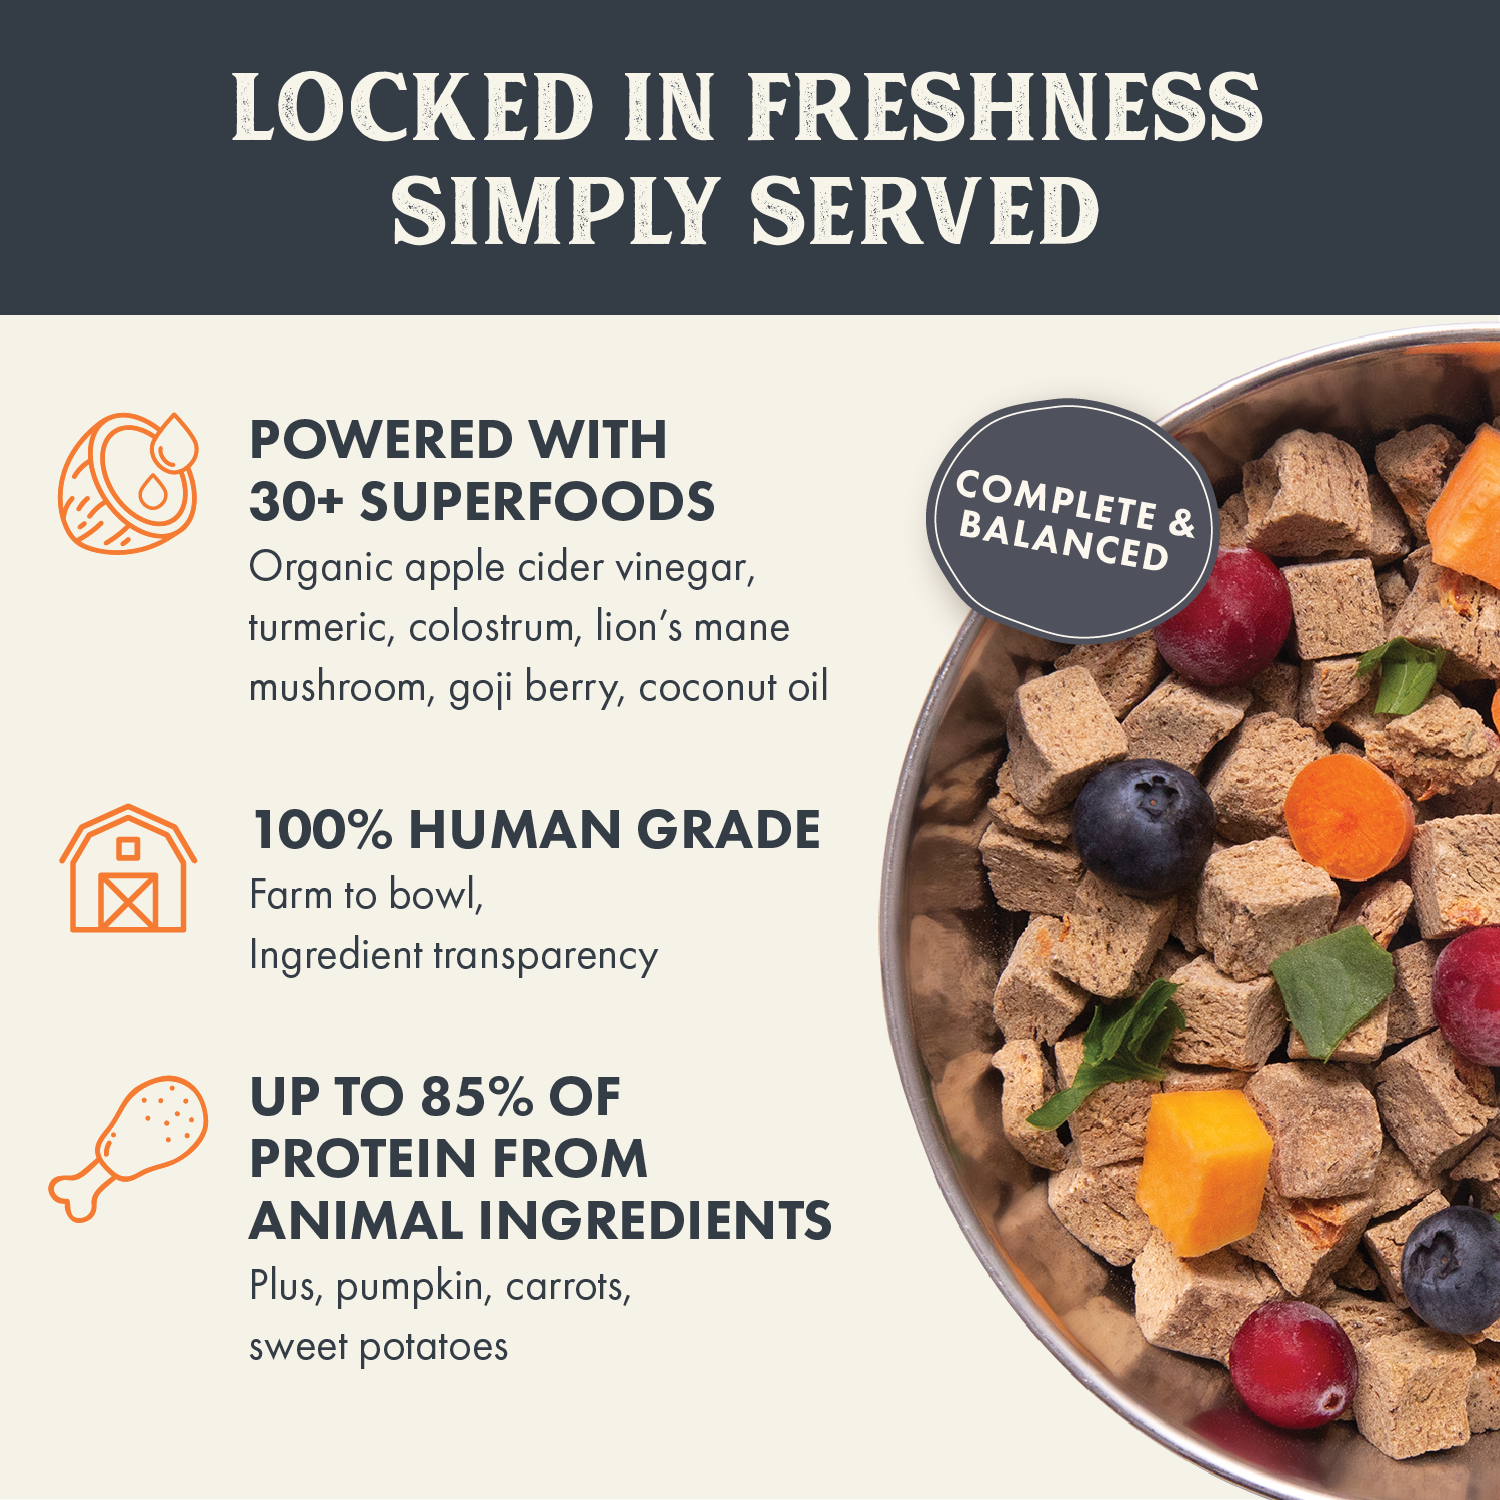 Health Extension Air Dried dog food highlighting freshness, with 'Powered with 30+ Superfoods' including organic ingredients and '100% Human Grade' assurance, boasting up to 85% protein from animal sources.